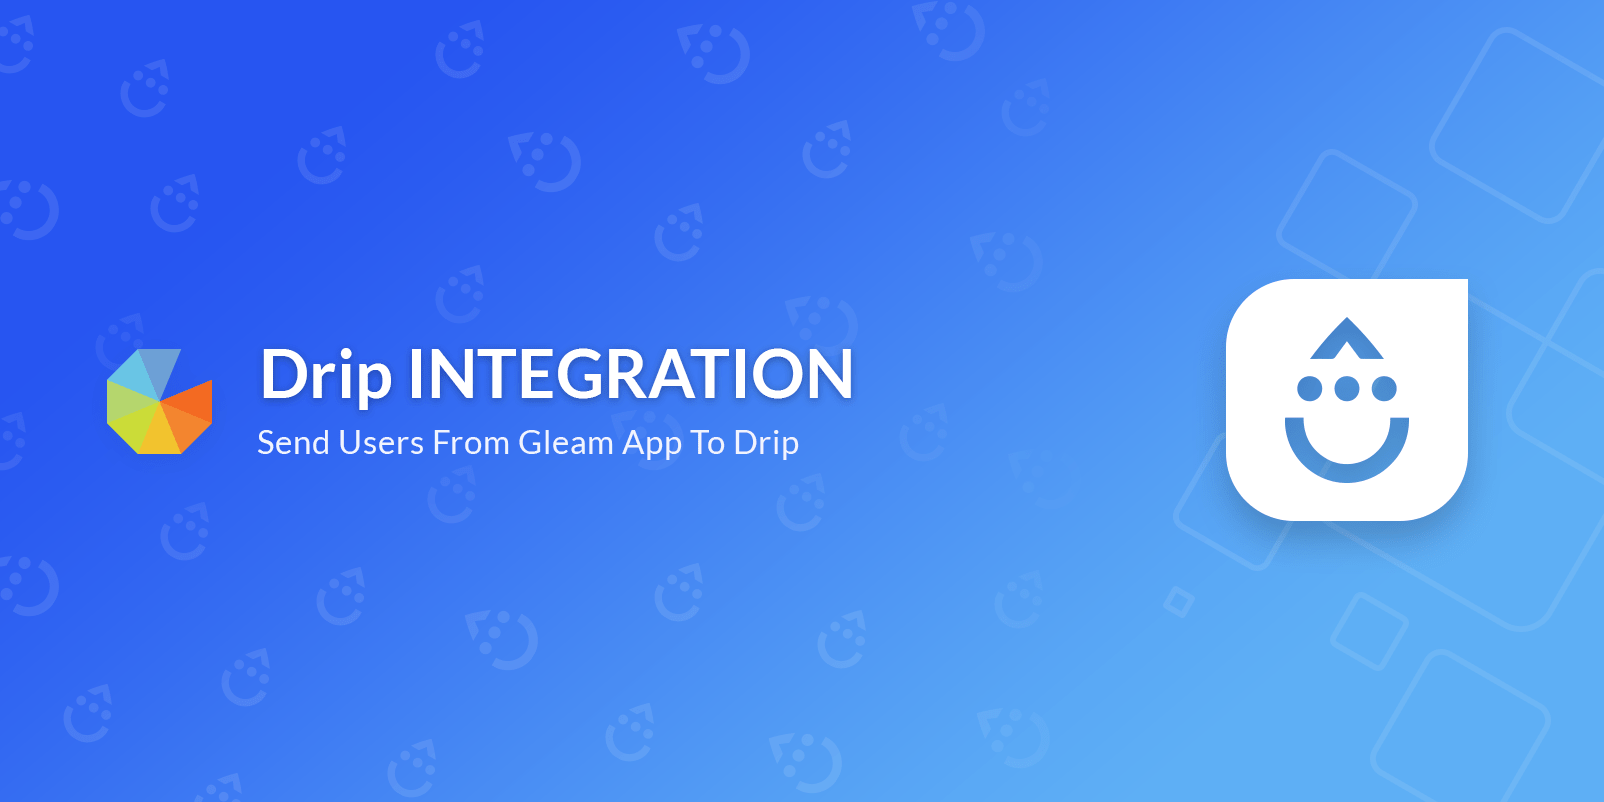 Drip intergration, send users from Gleam app to Drip